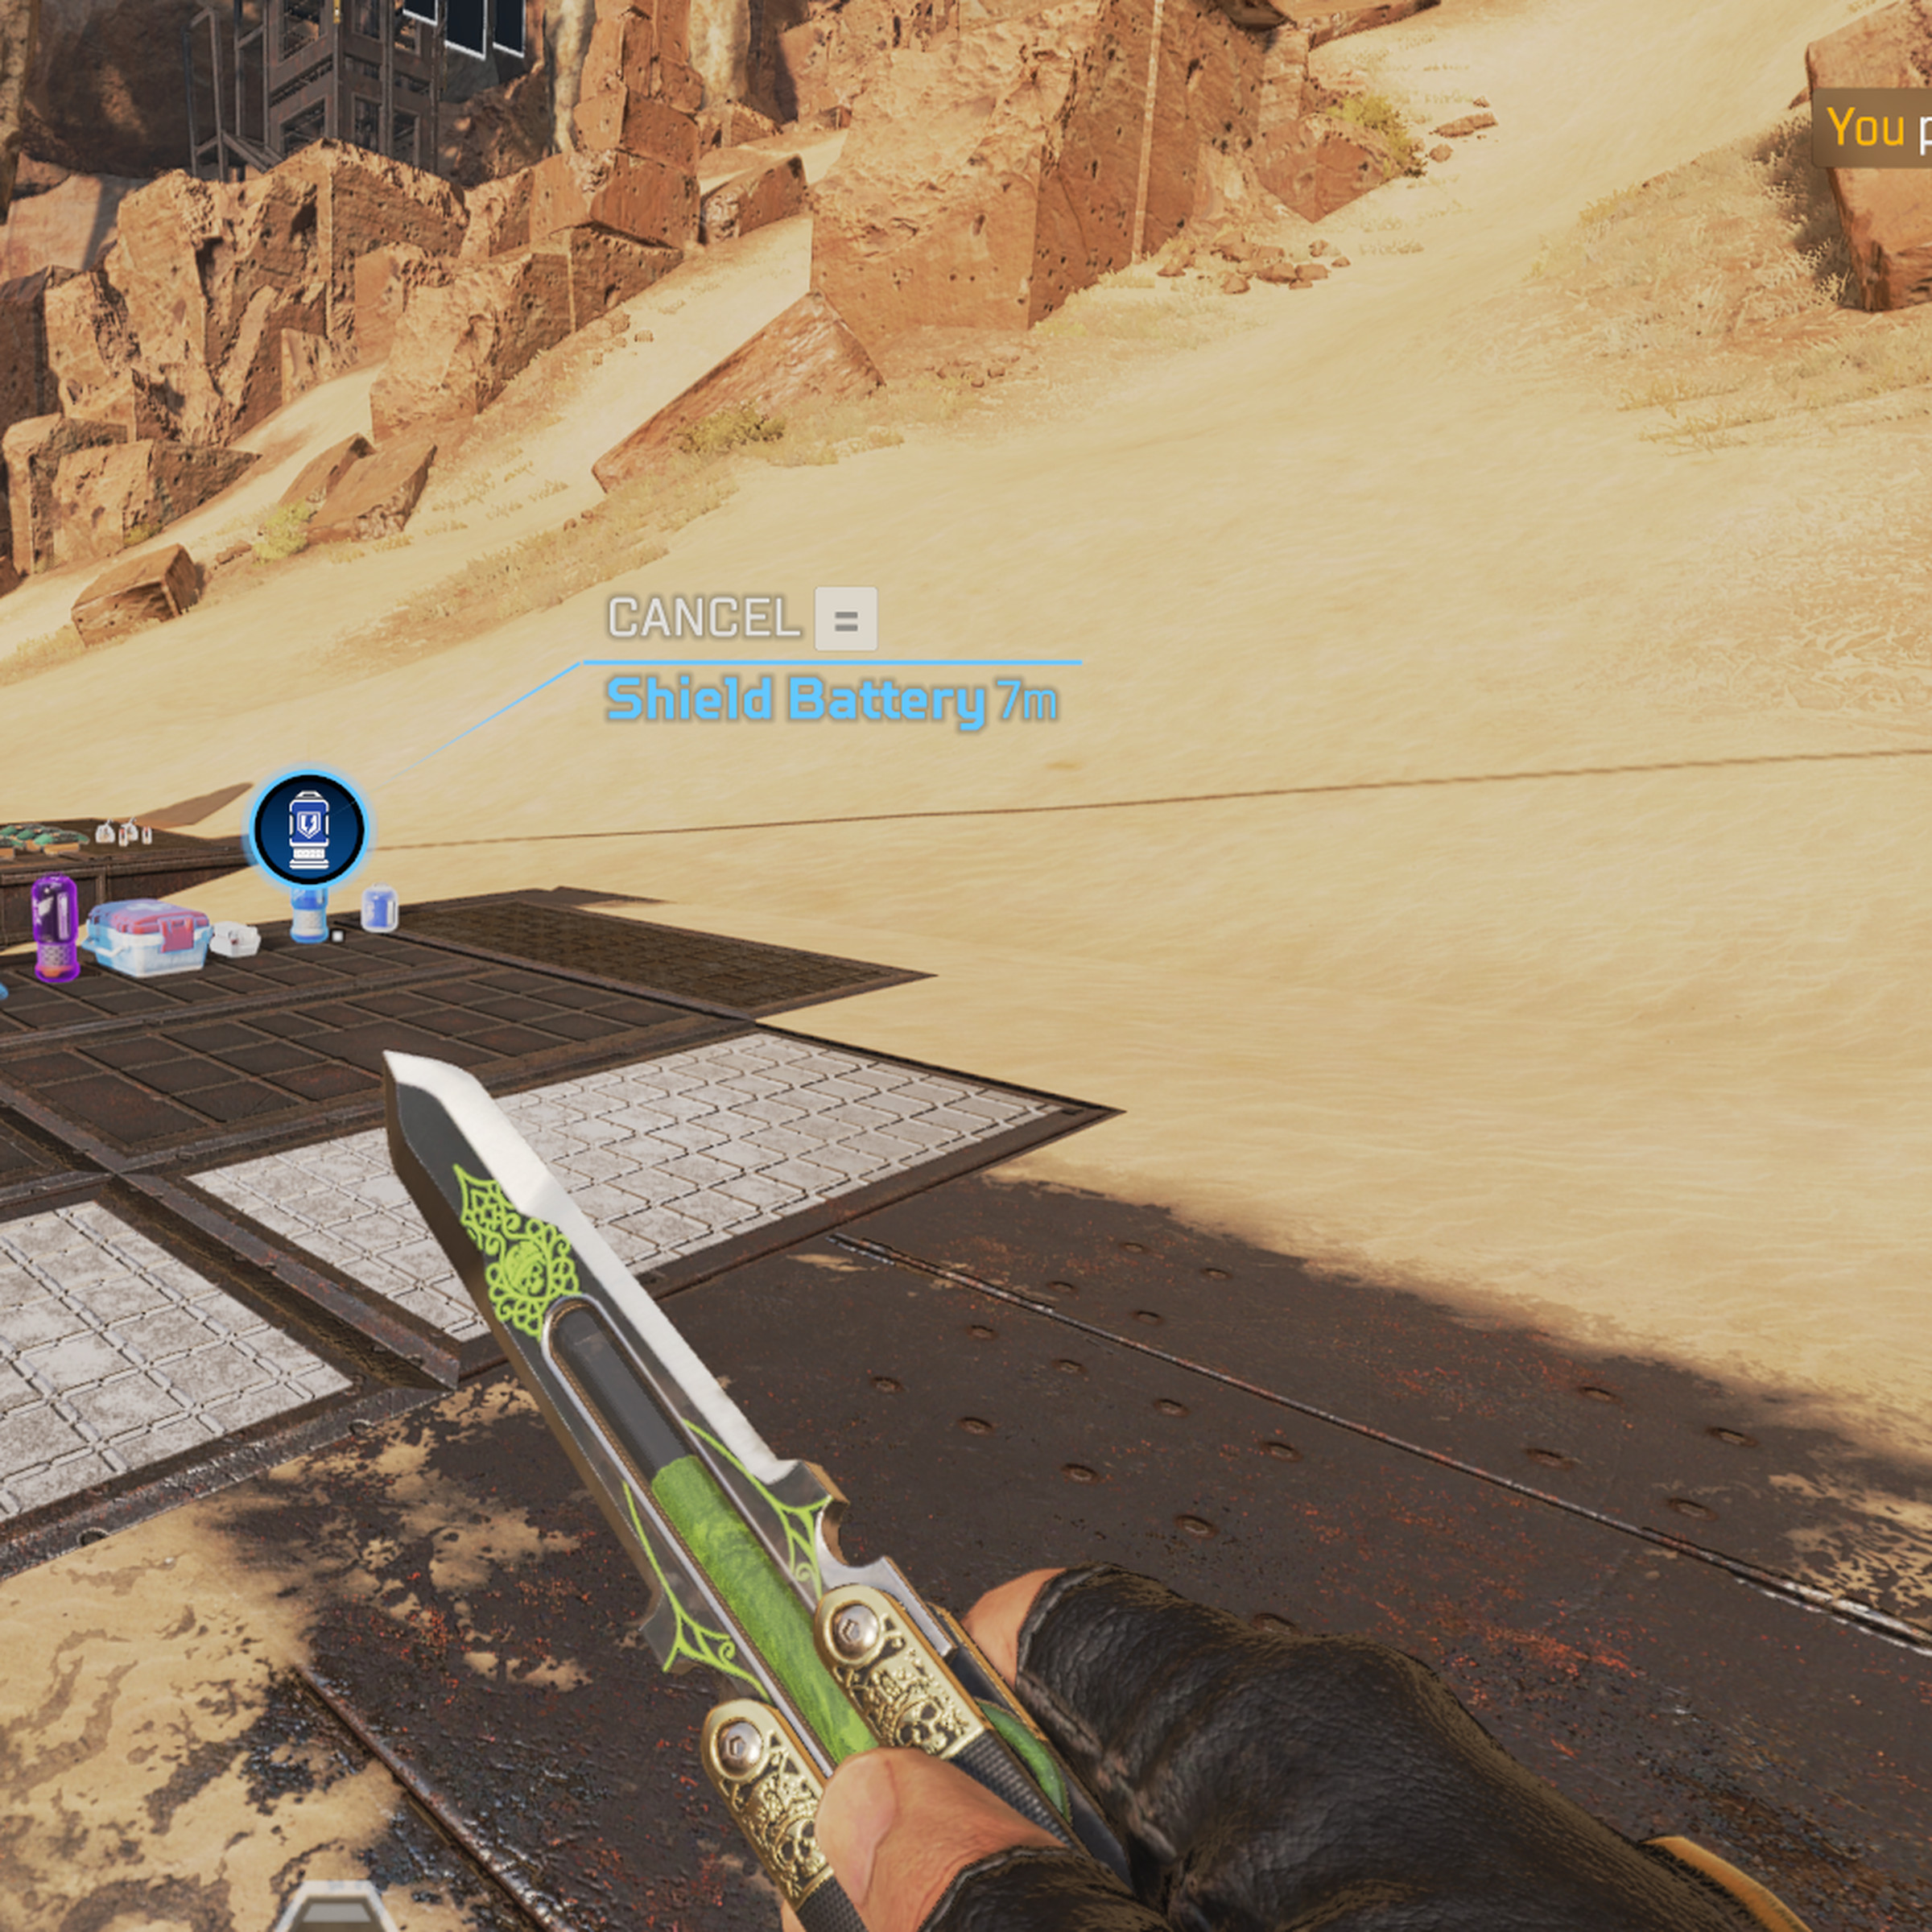 Screenshot of Apex Legends, showing a dessert landscape and a hand holding a knife, with text in the upper right corner that says “you pinged shield battery.”